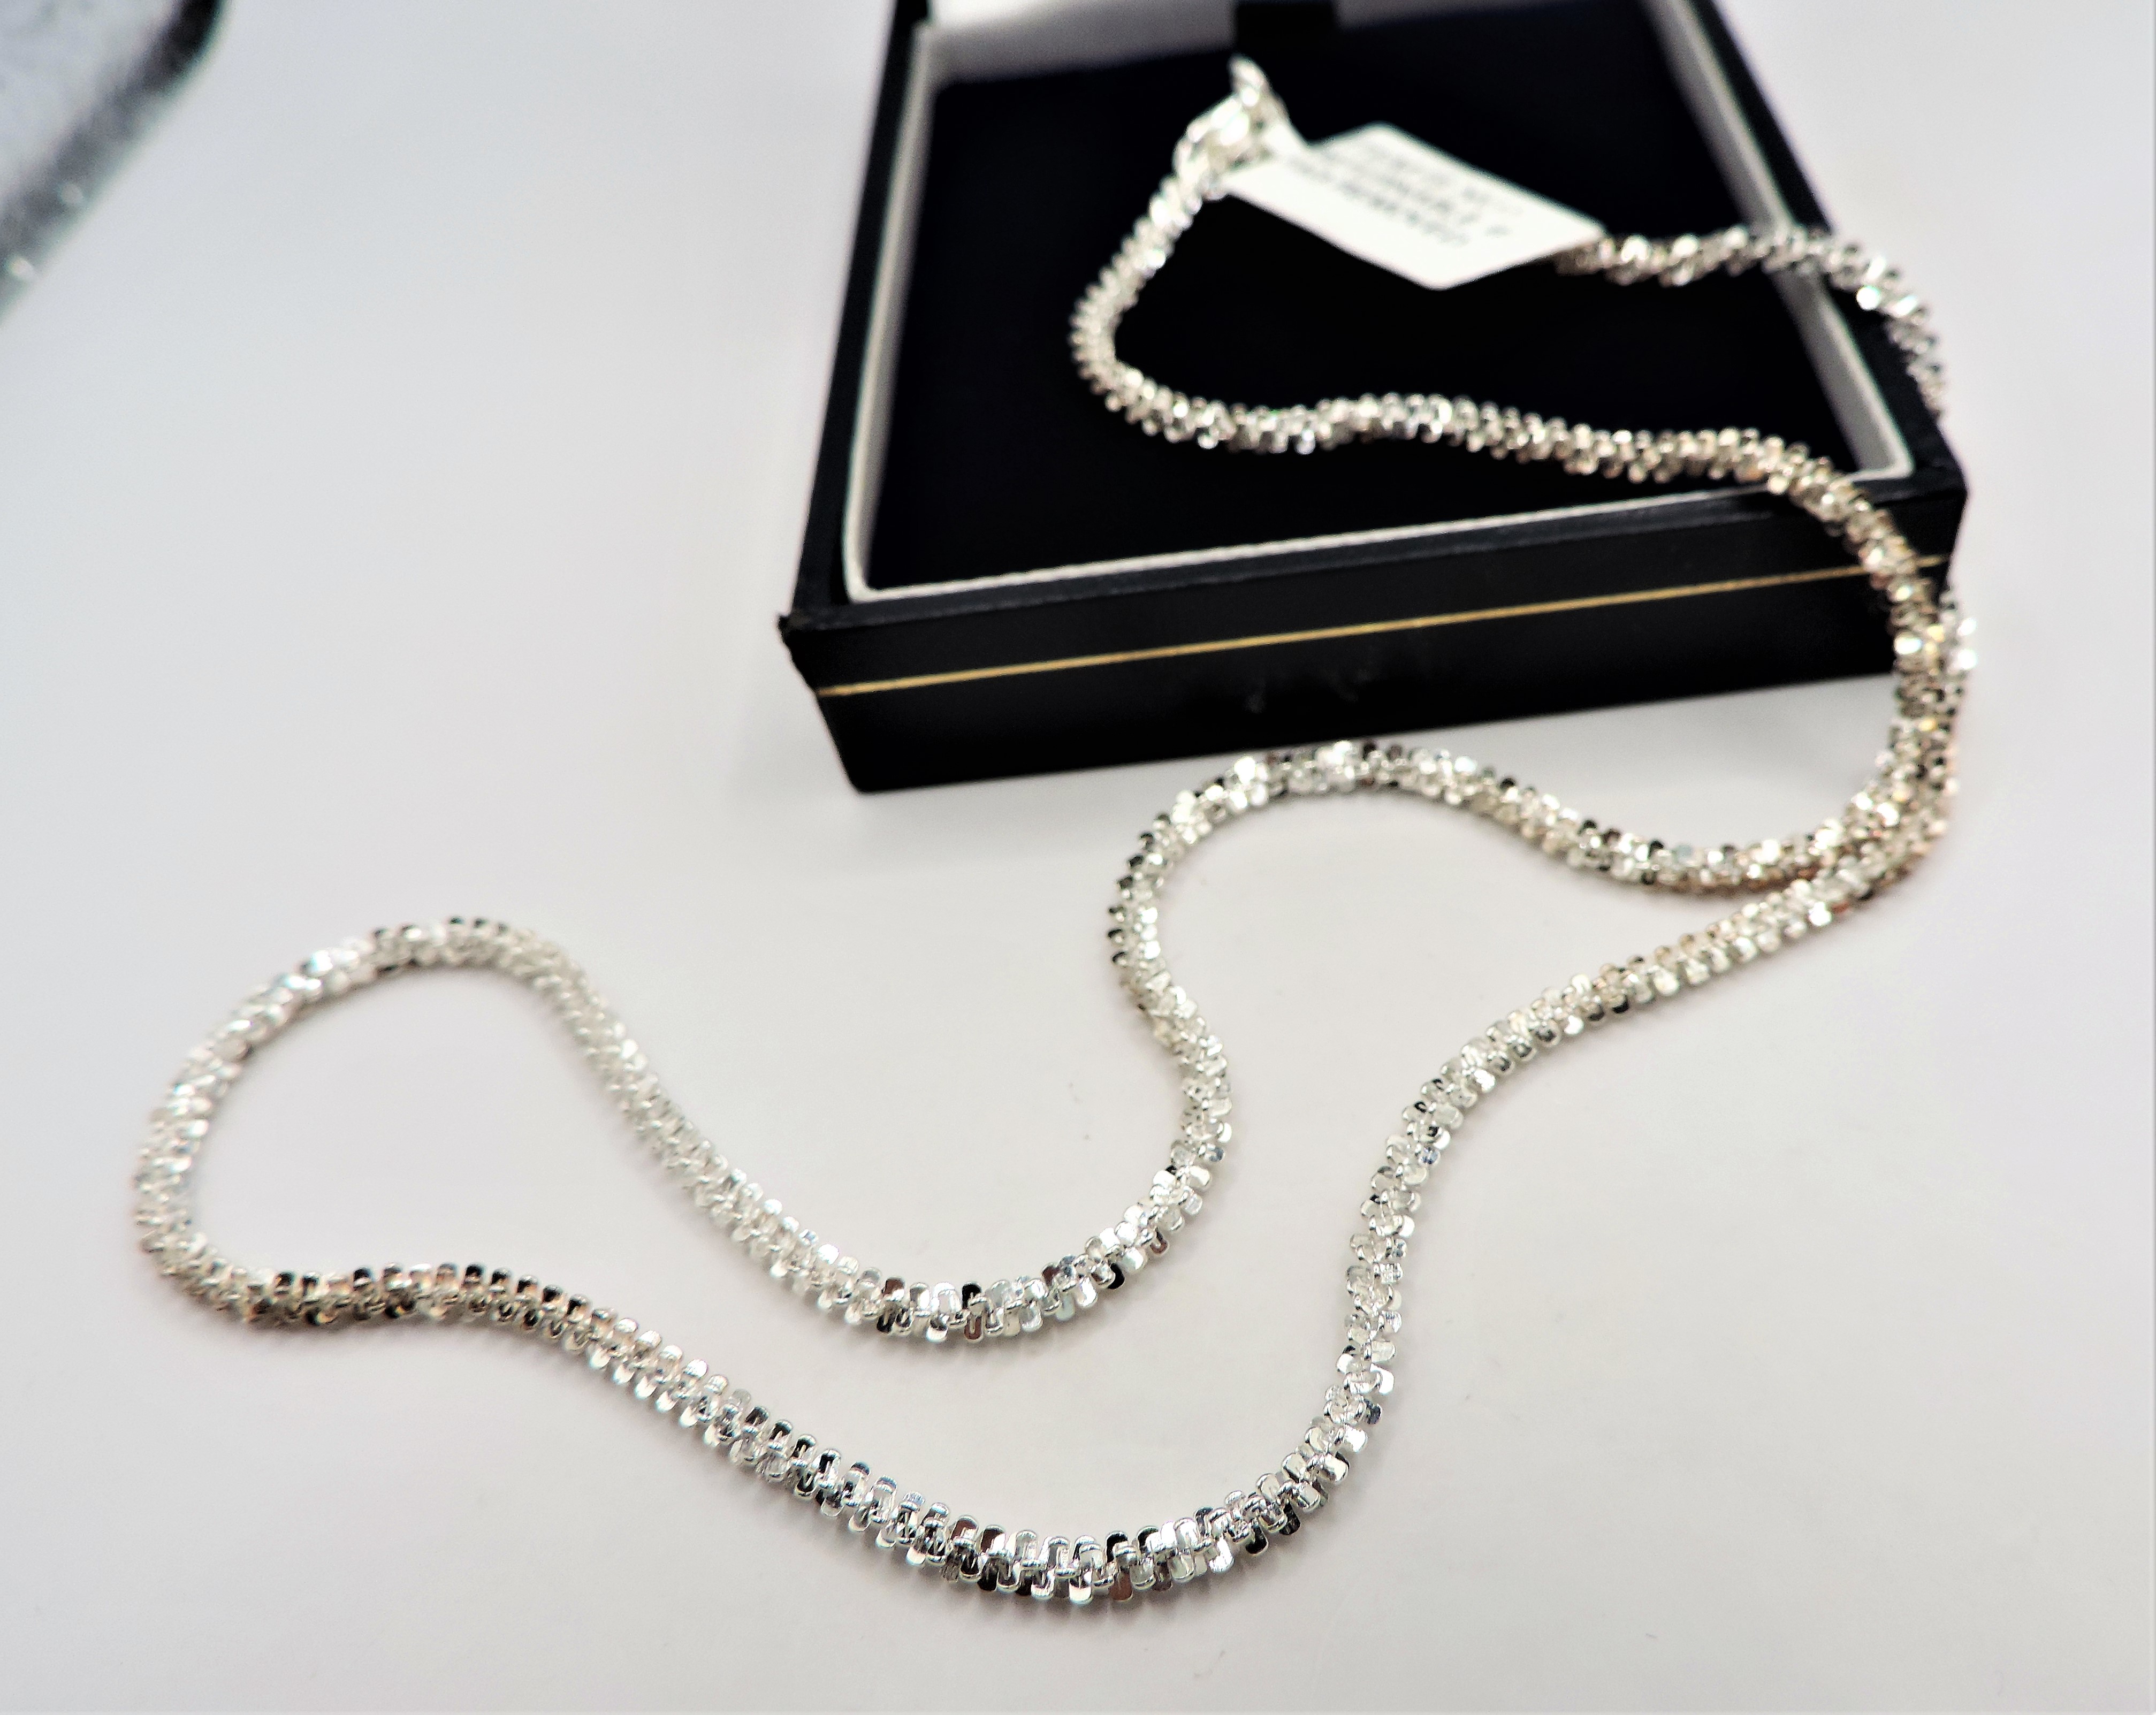 Italian 925 Sterling Silver Sparkle Glitter Margarita Twisted Rock Chain New with Gift Pouch - Image 3 of 3